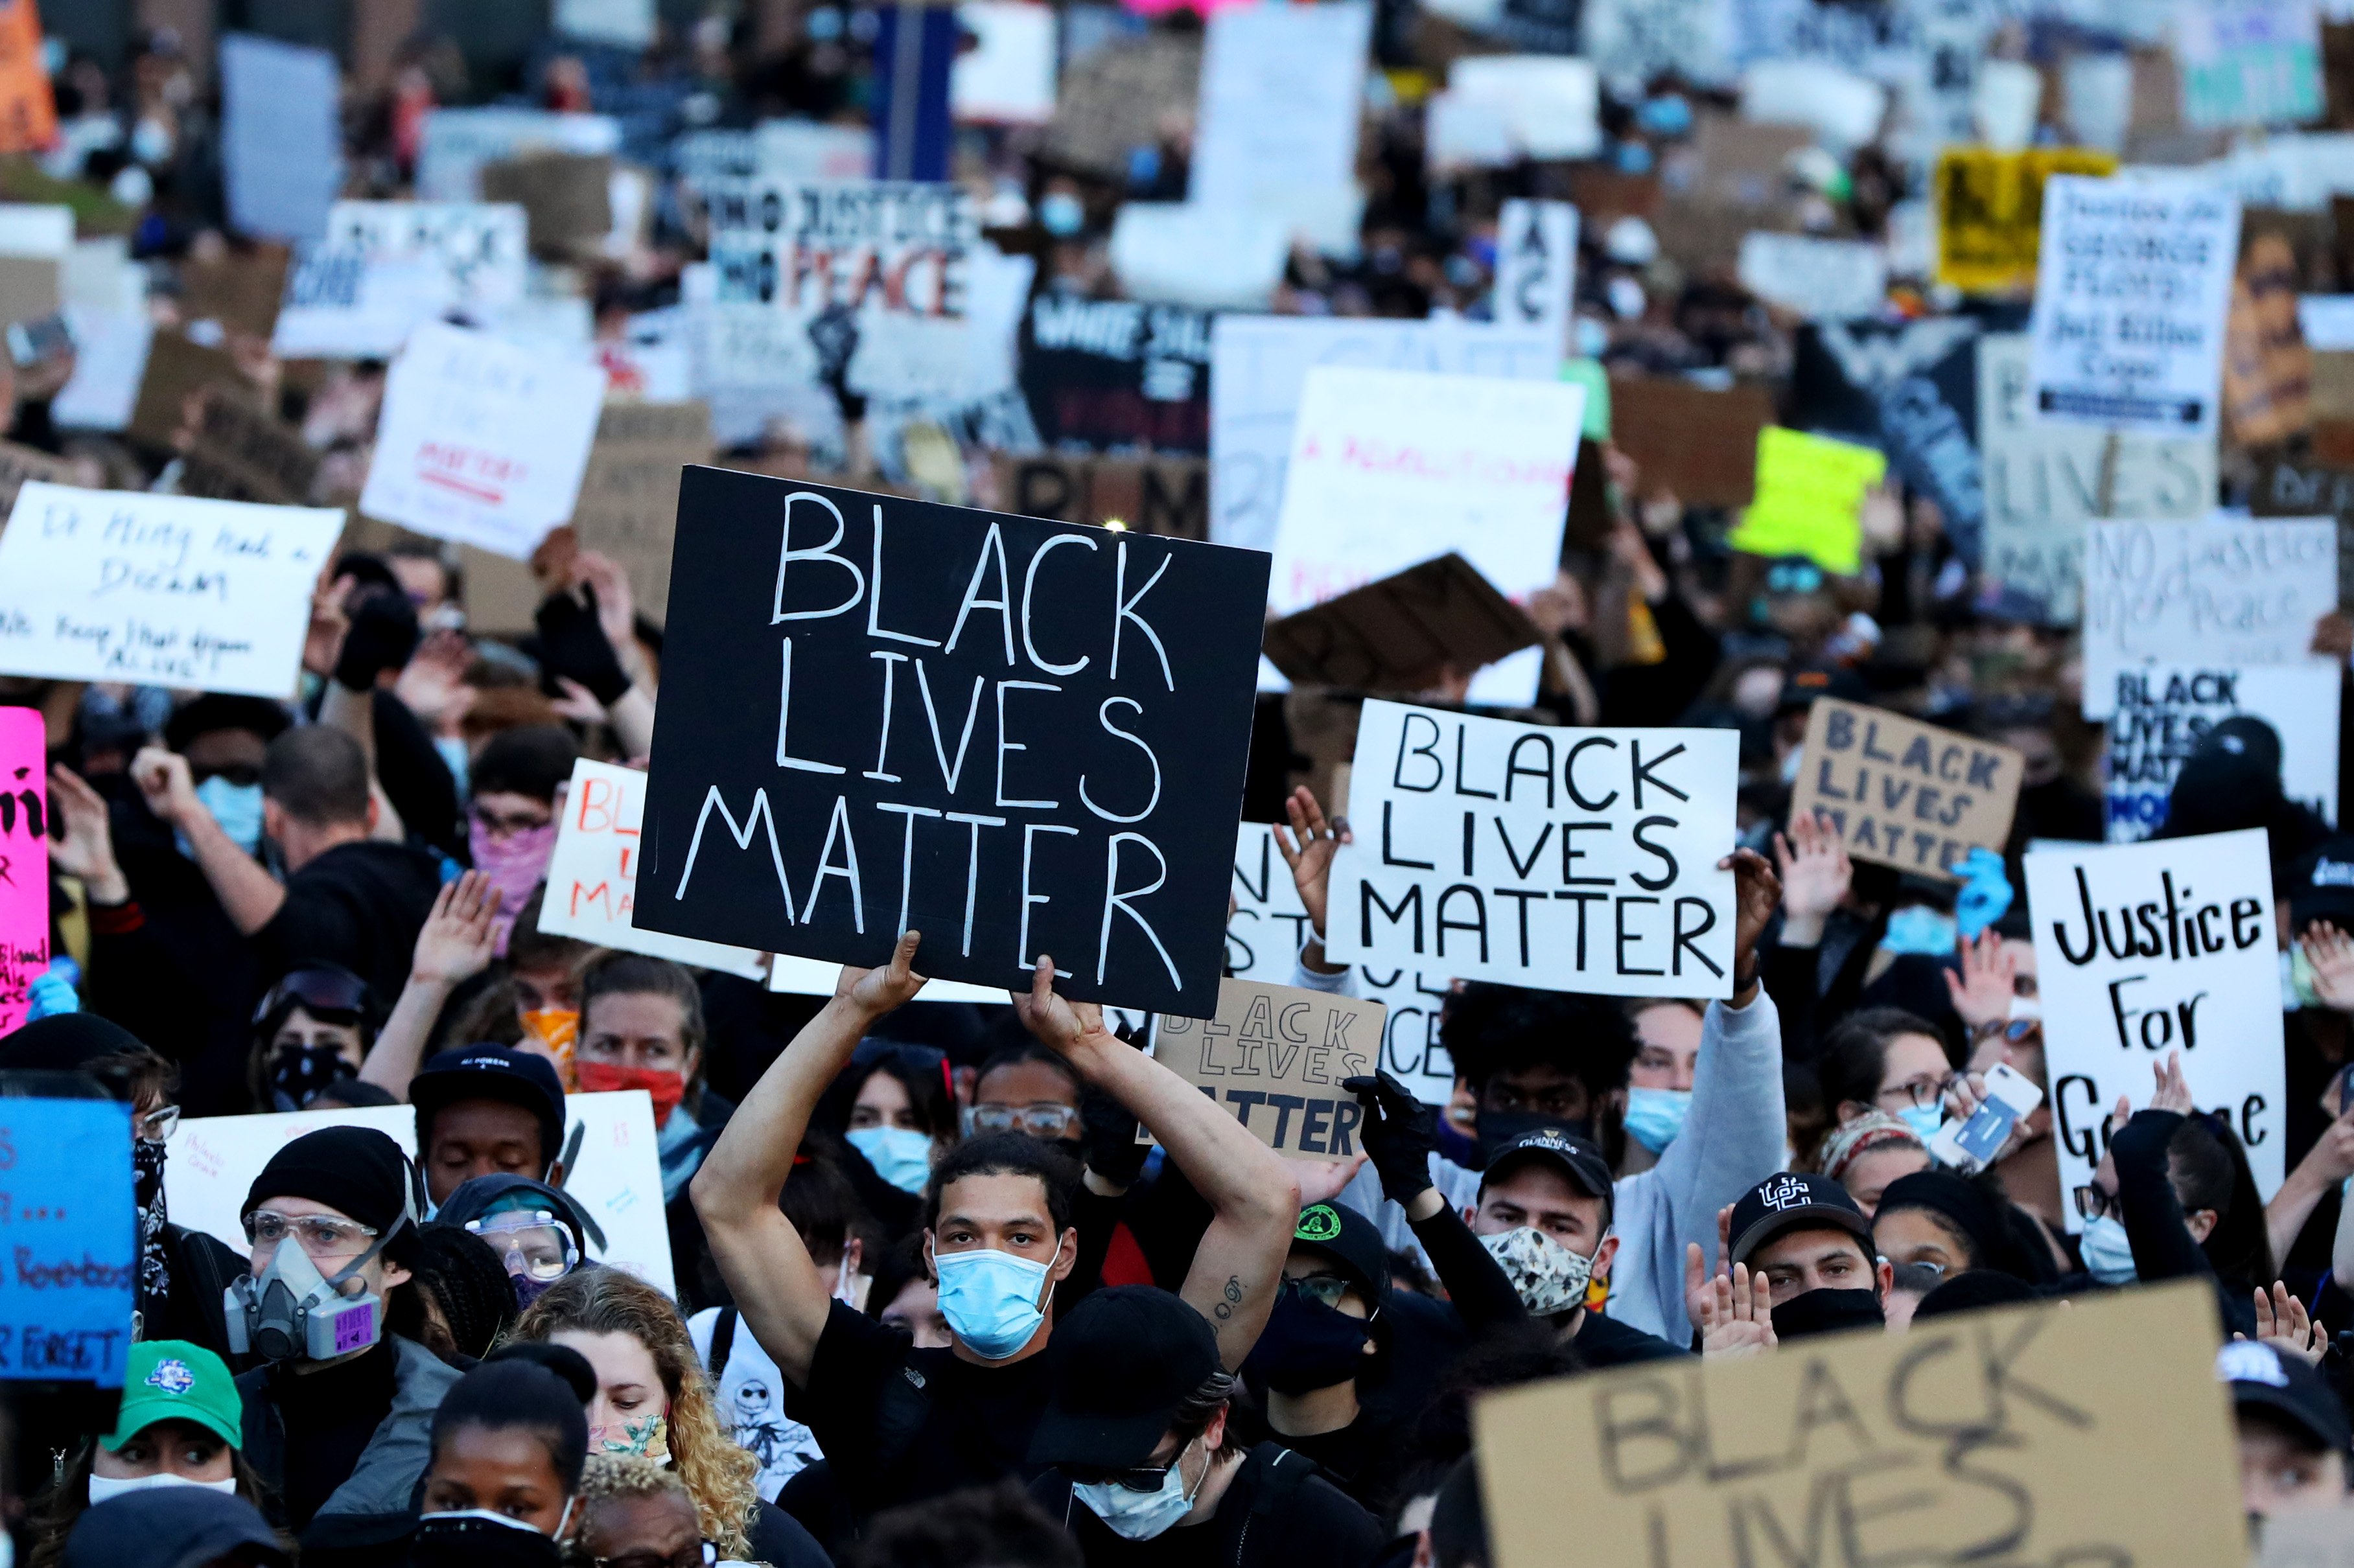 Demonstrators protest over the death of George Floyd on May 31, 2020 in Boston, Massachusetts | Photo: Getty Images